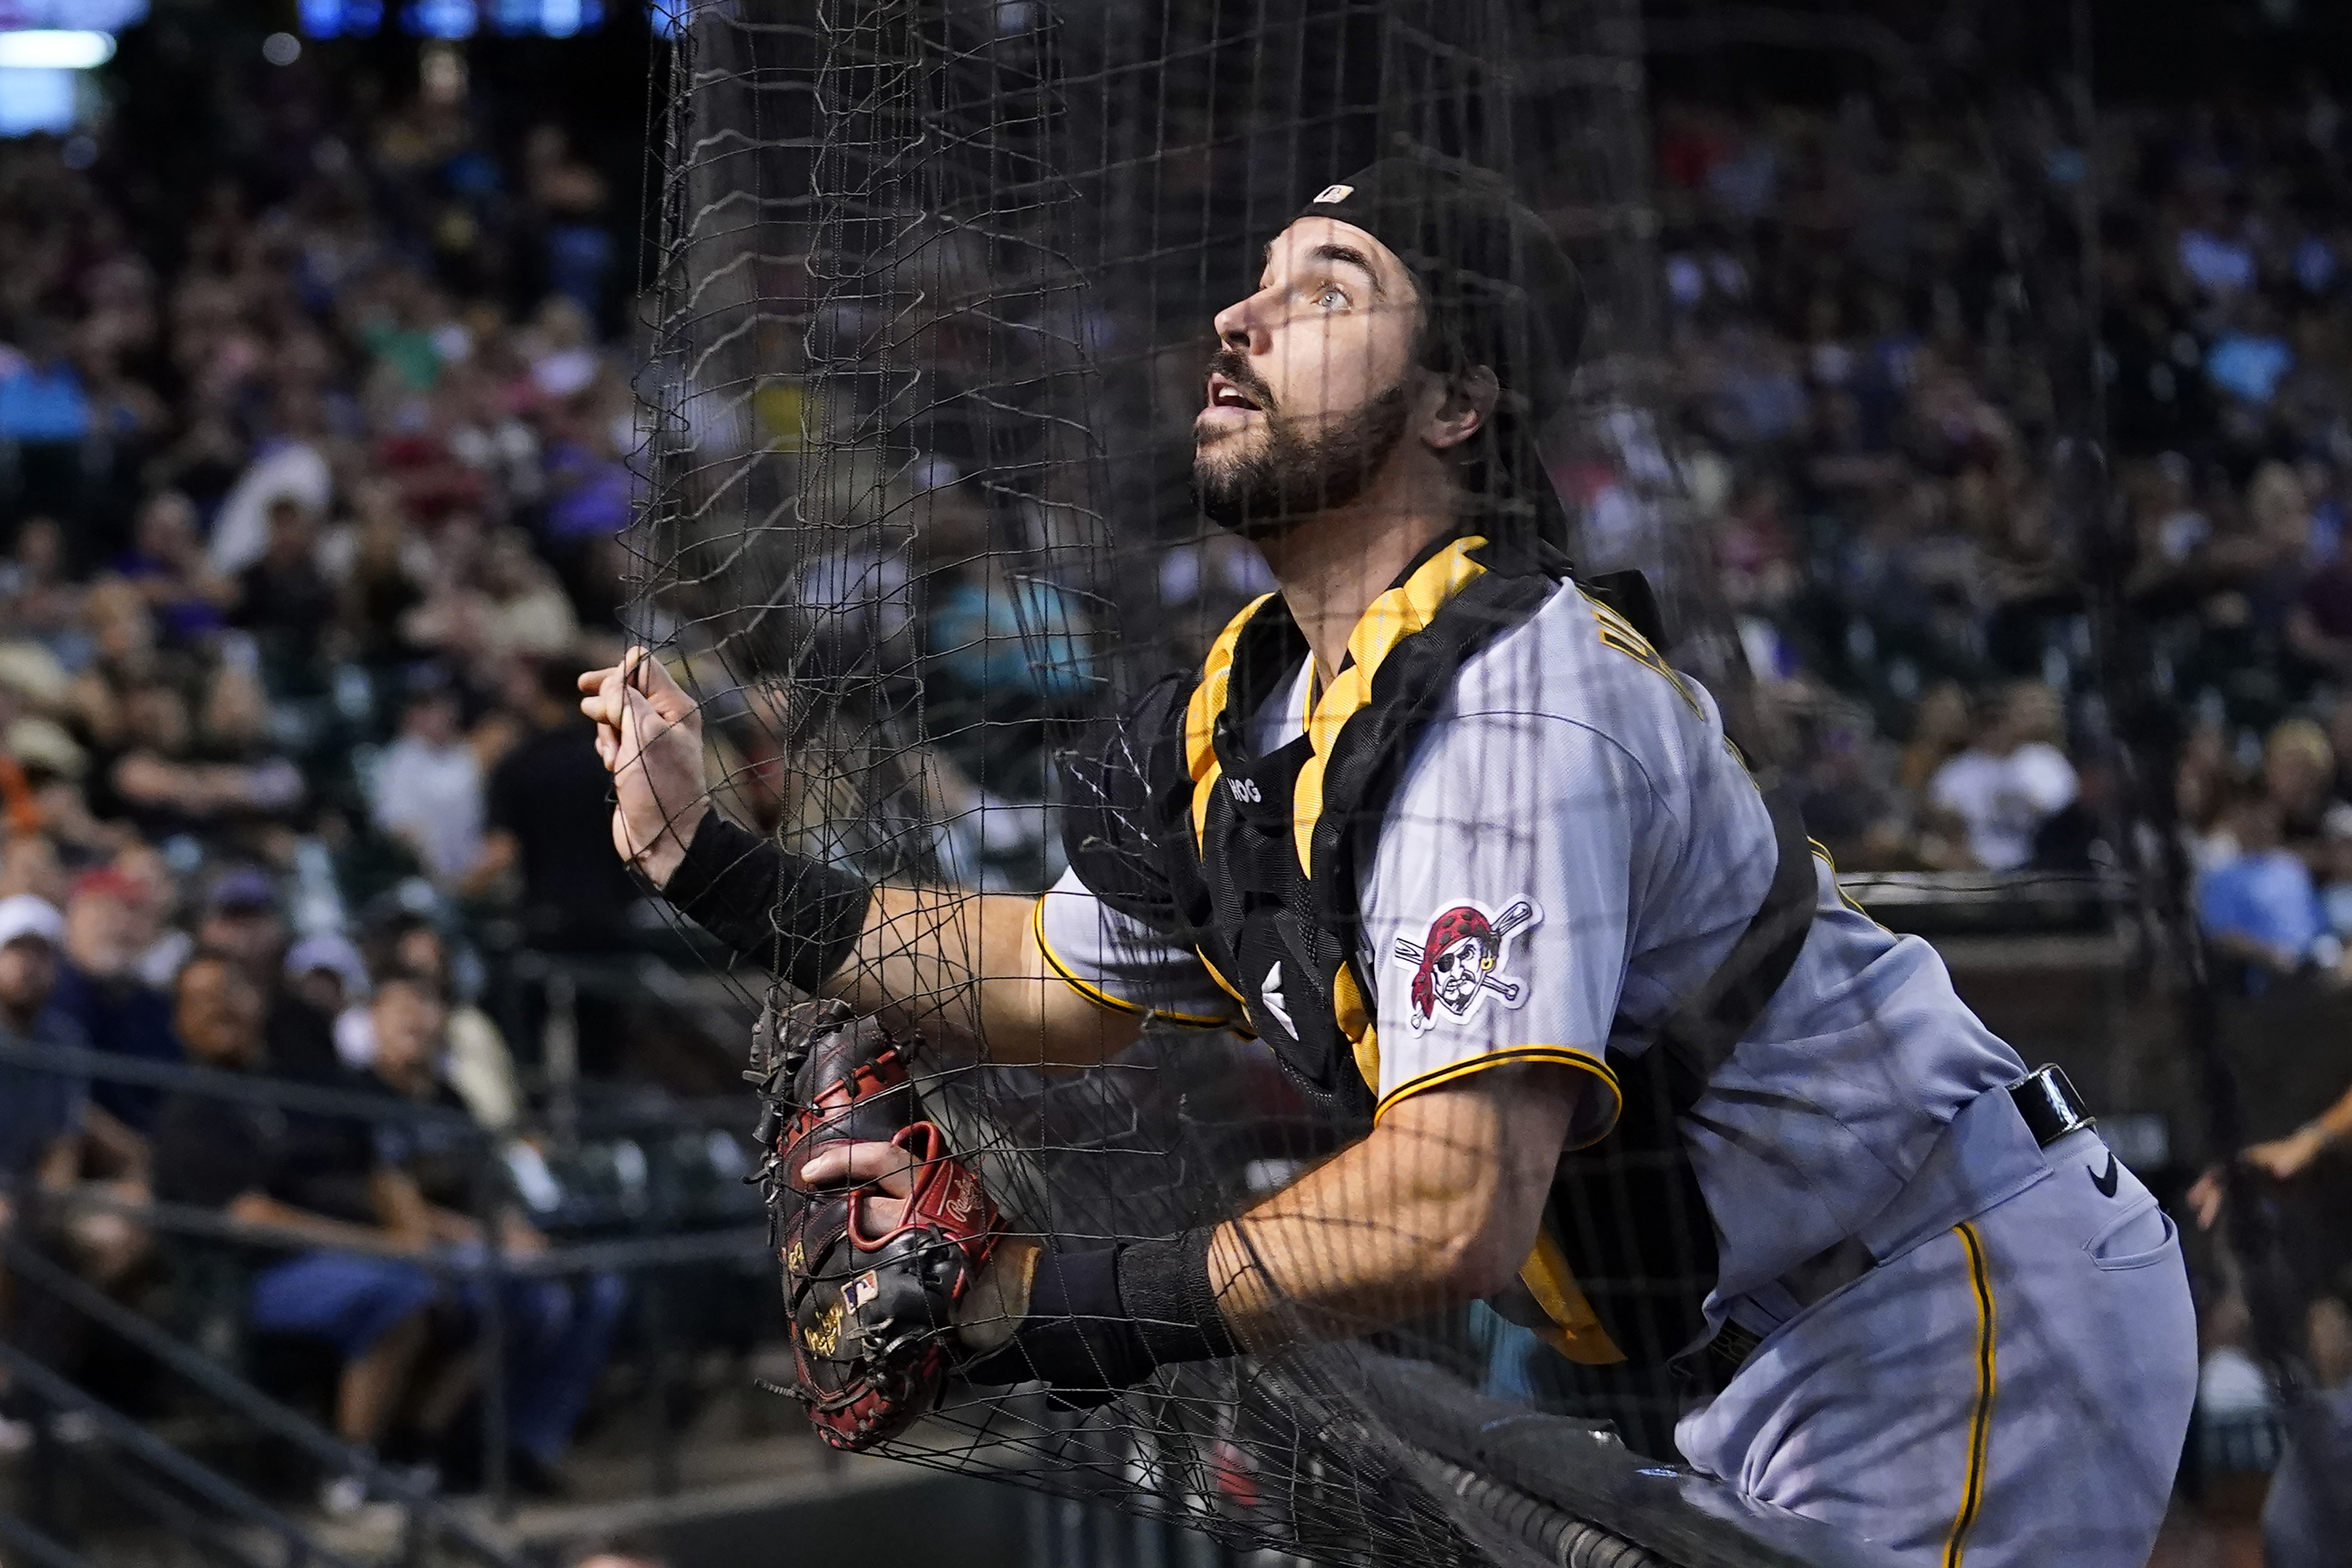 Rangers make move for Pirates catcher Austin Hedges in final hour